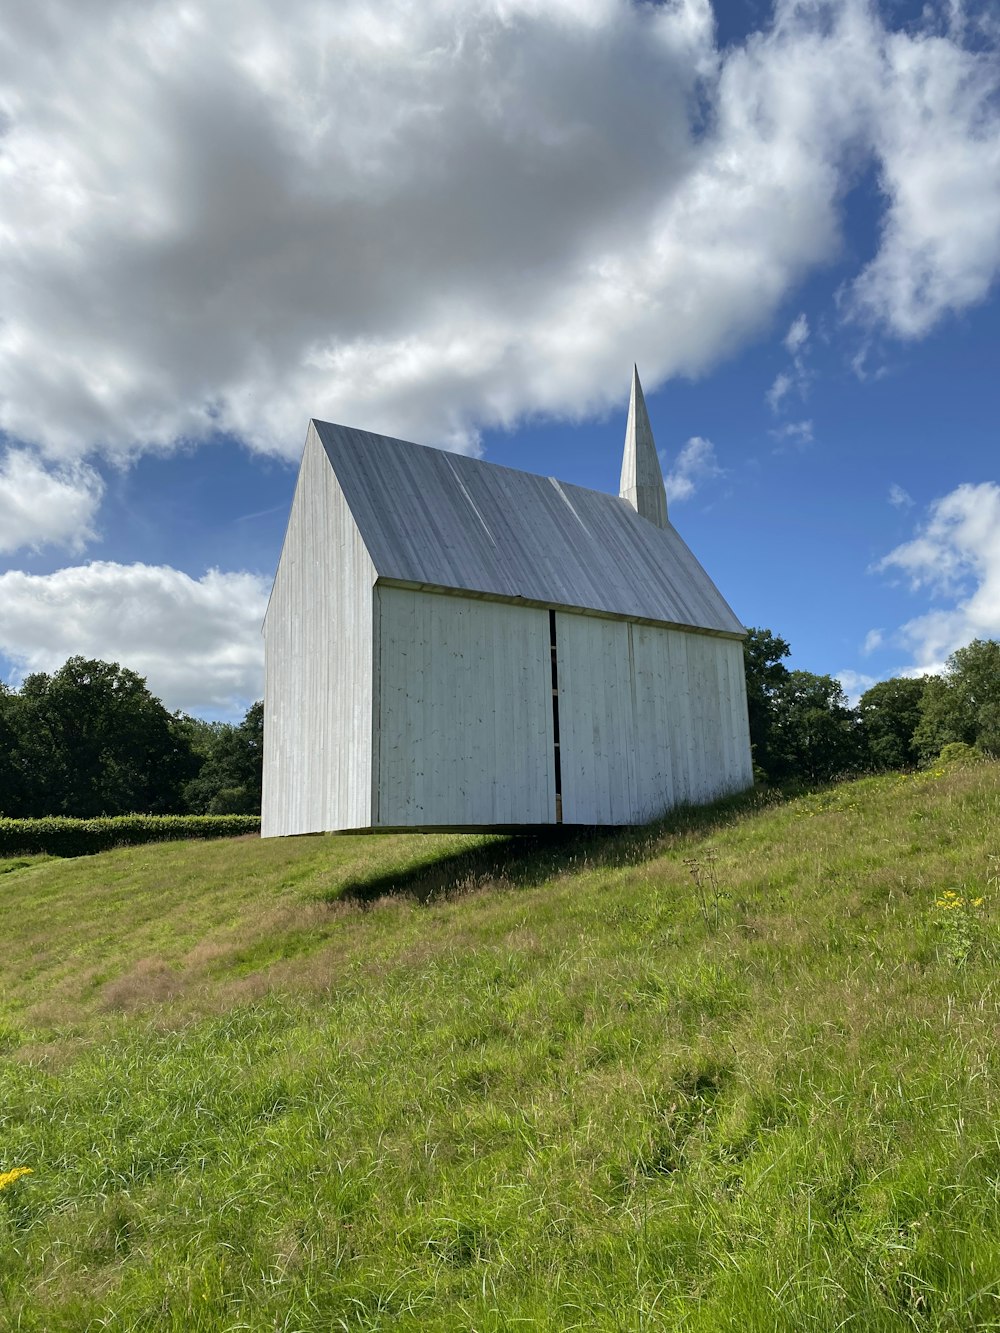 white wooden barn on green grass field under blue sky and white clouds during daytime